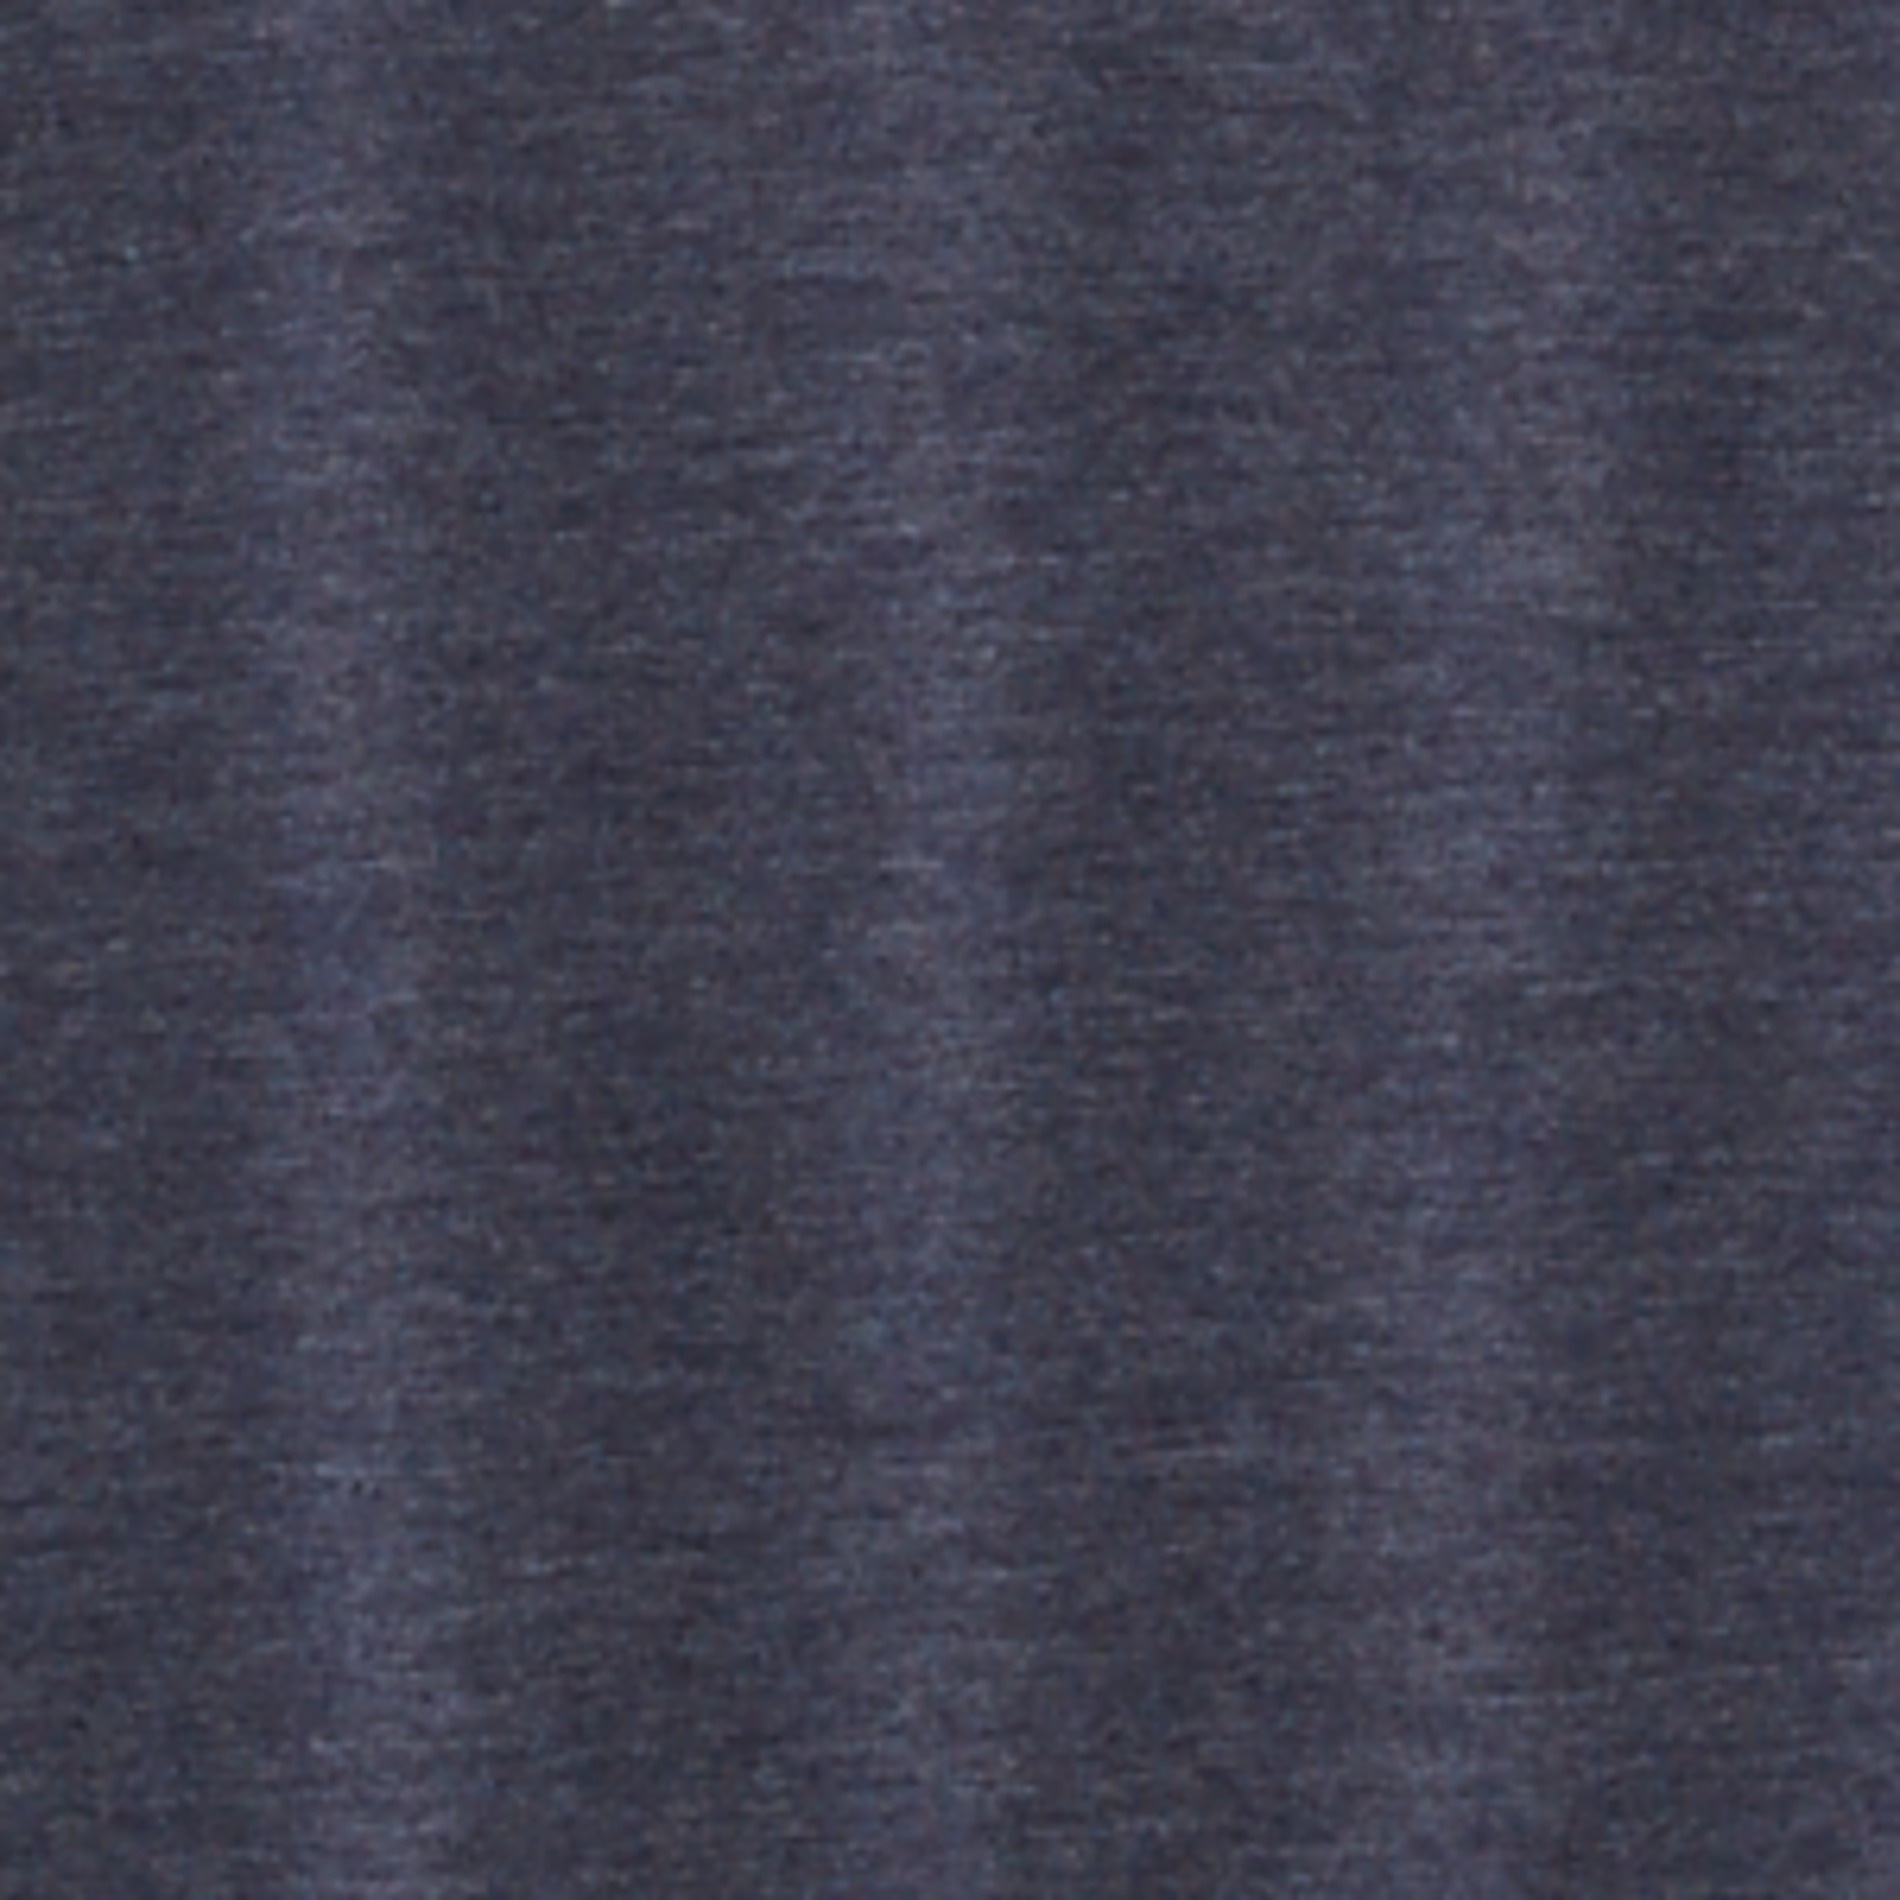 Selected Color is Navy/Heather Grey